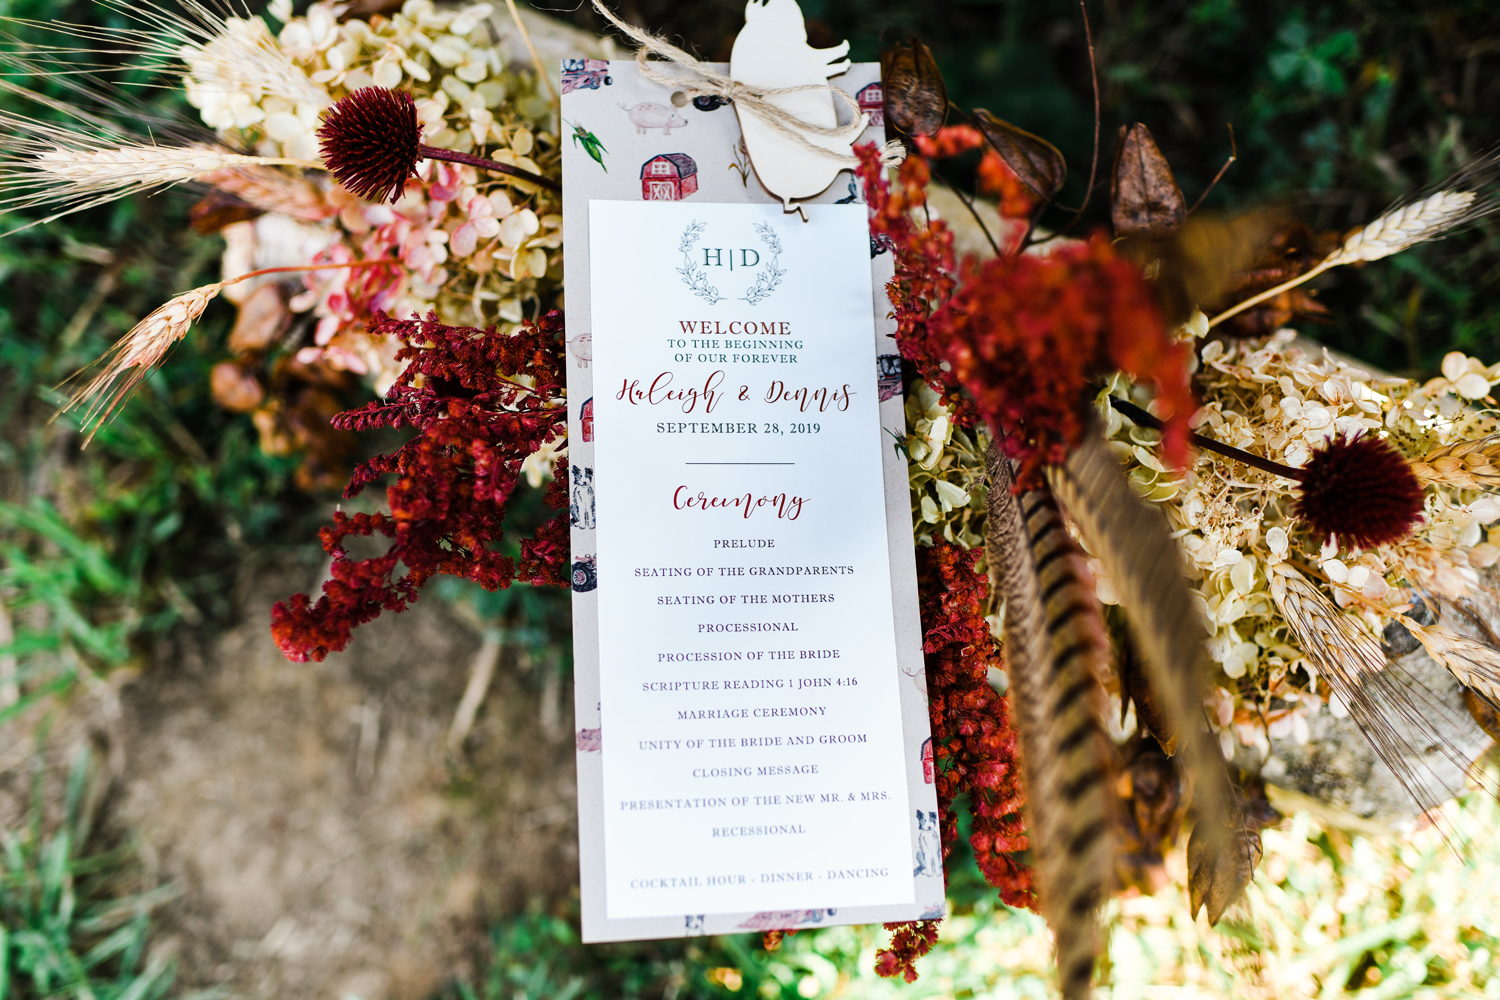 other elements to consider for your wedding programs